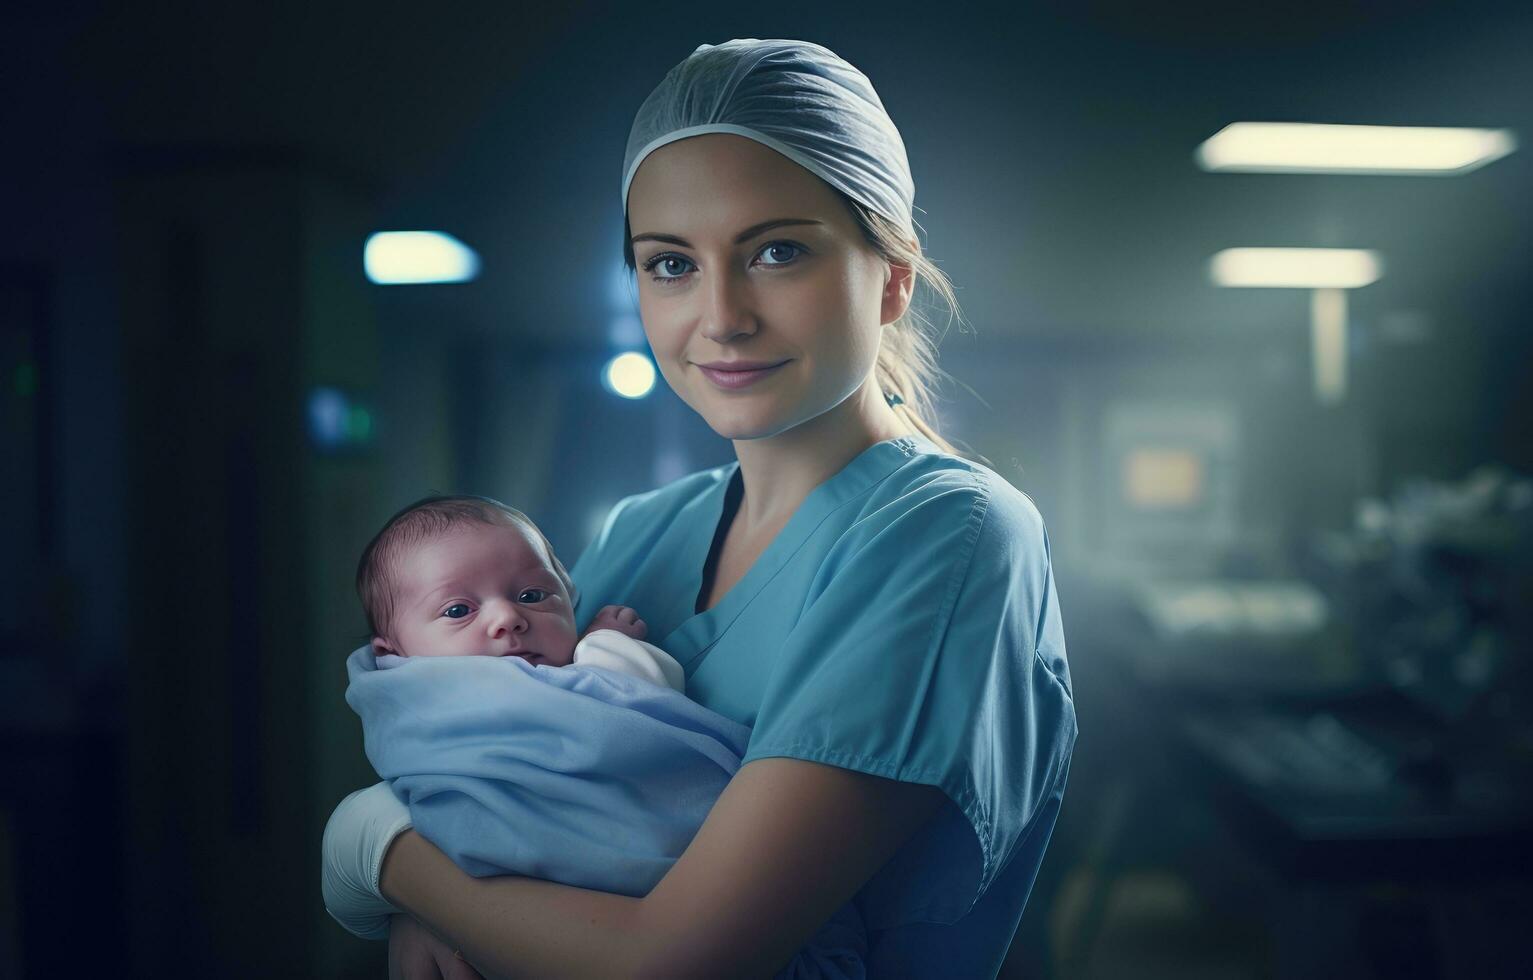 AI generated a nurse wearing scrubs holding a baby under her arms photo